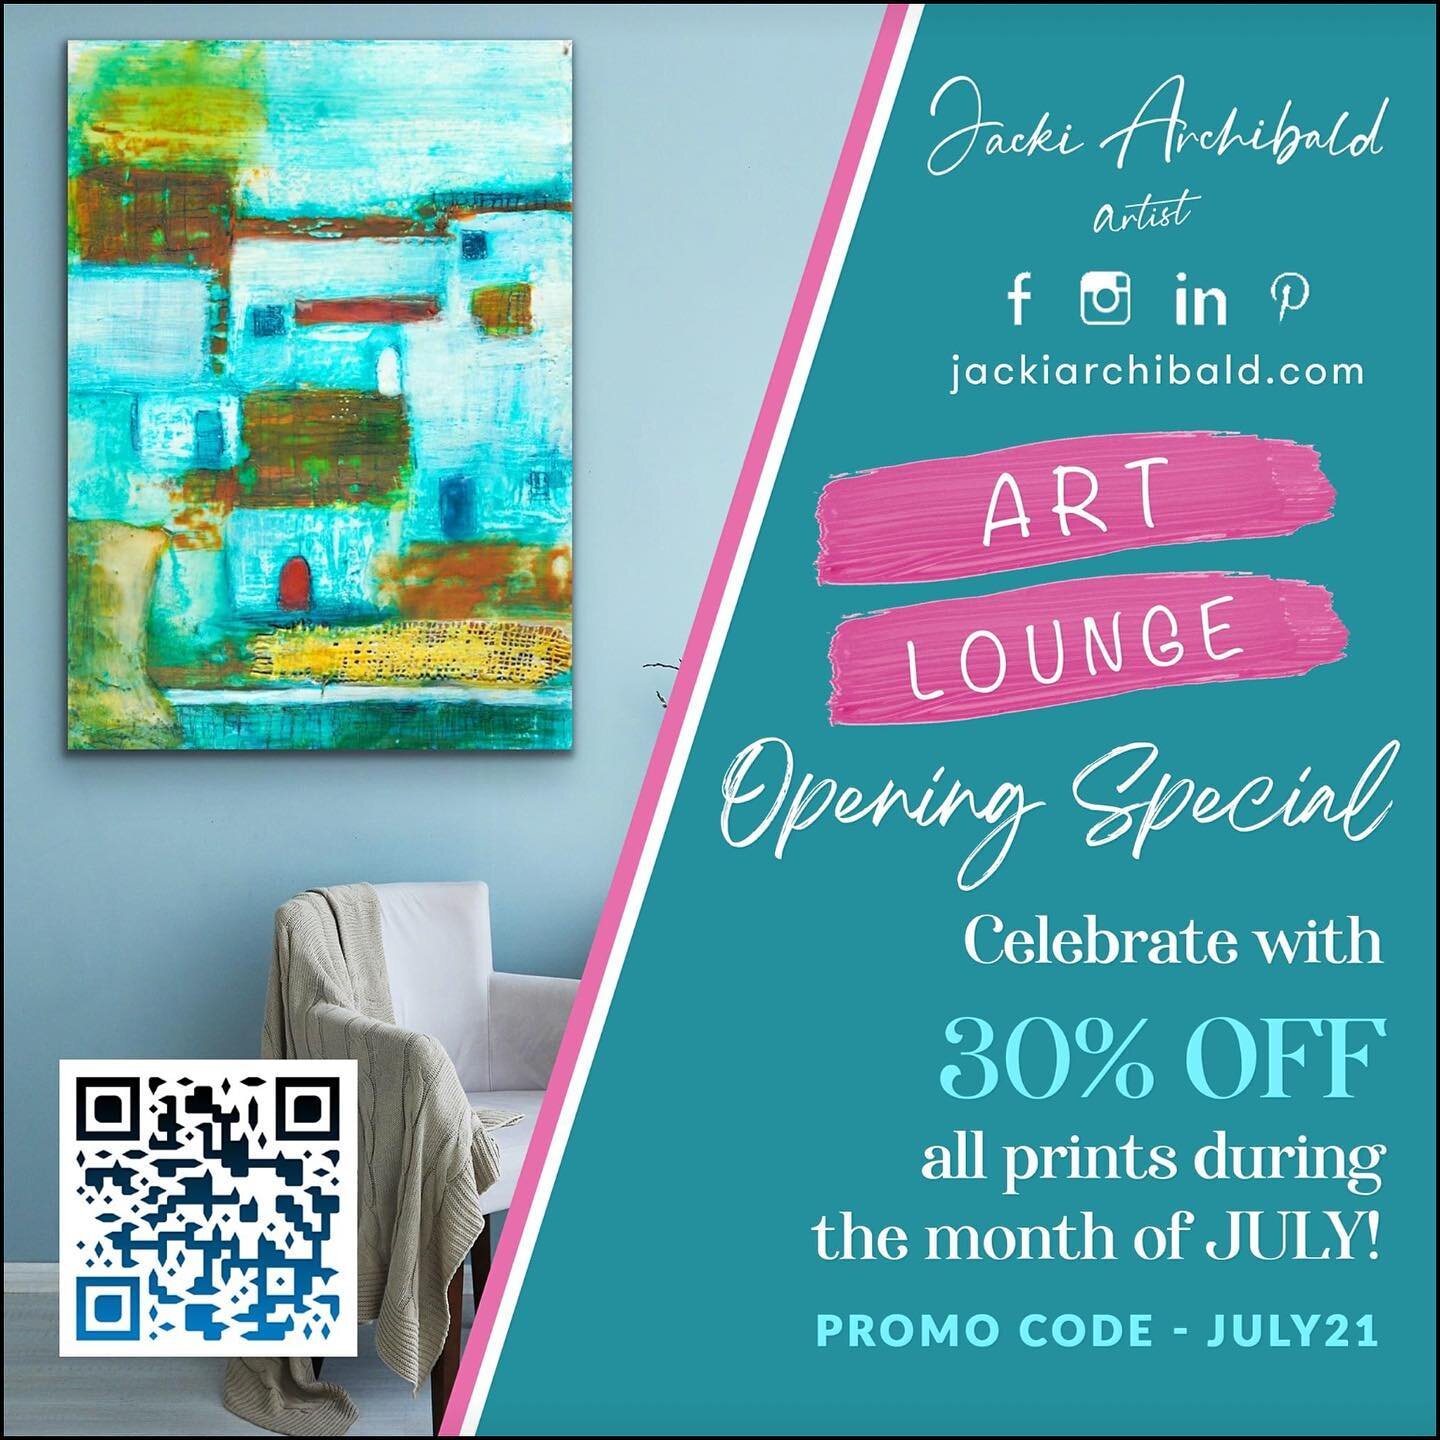 Don&rsquo;t delay visit website in bio &amp; use promo code - JULY21 to get 30% OFF all canvas prints in July #shoponline #openingsale #artistsoninstagram #canvasprints #jackiarchibaldartist #cairnsaustralia